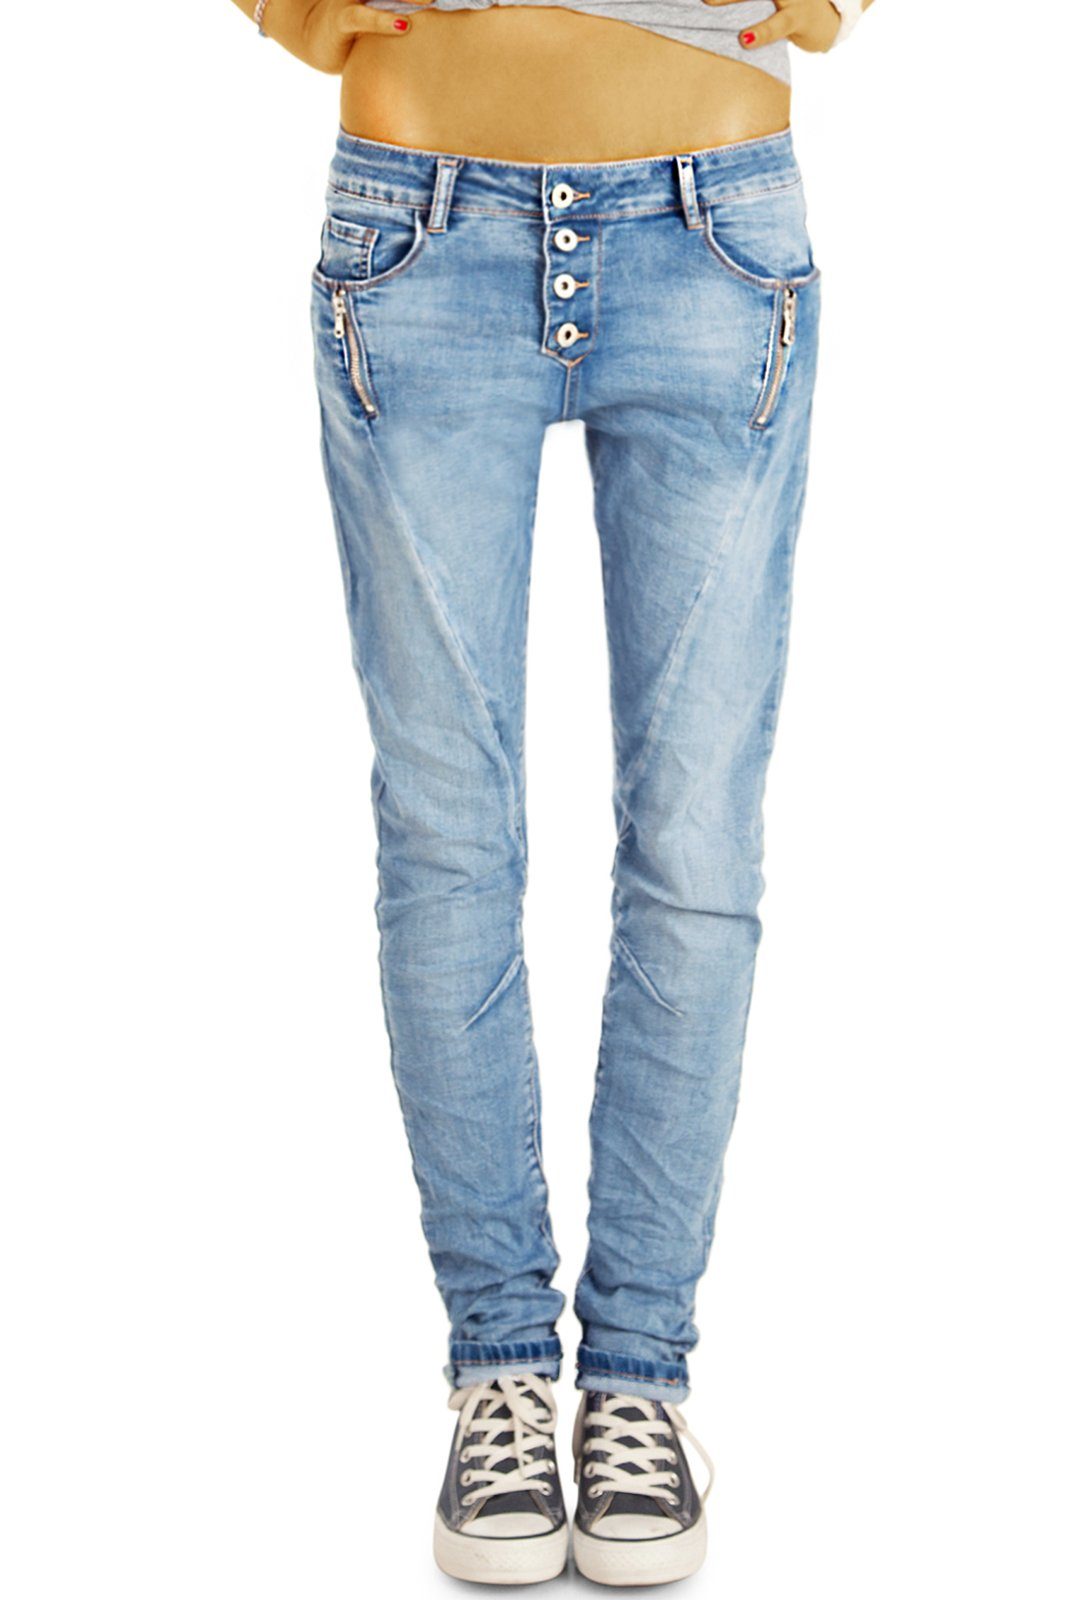 j6i mit Hosen Knopfleiste blau baggy be Relax-fit-Jeans tapered Damenjeans, styled